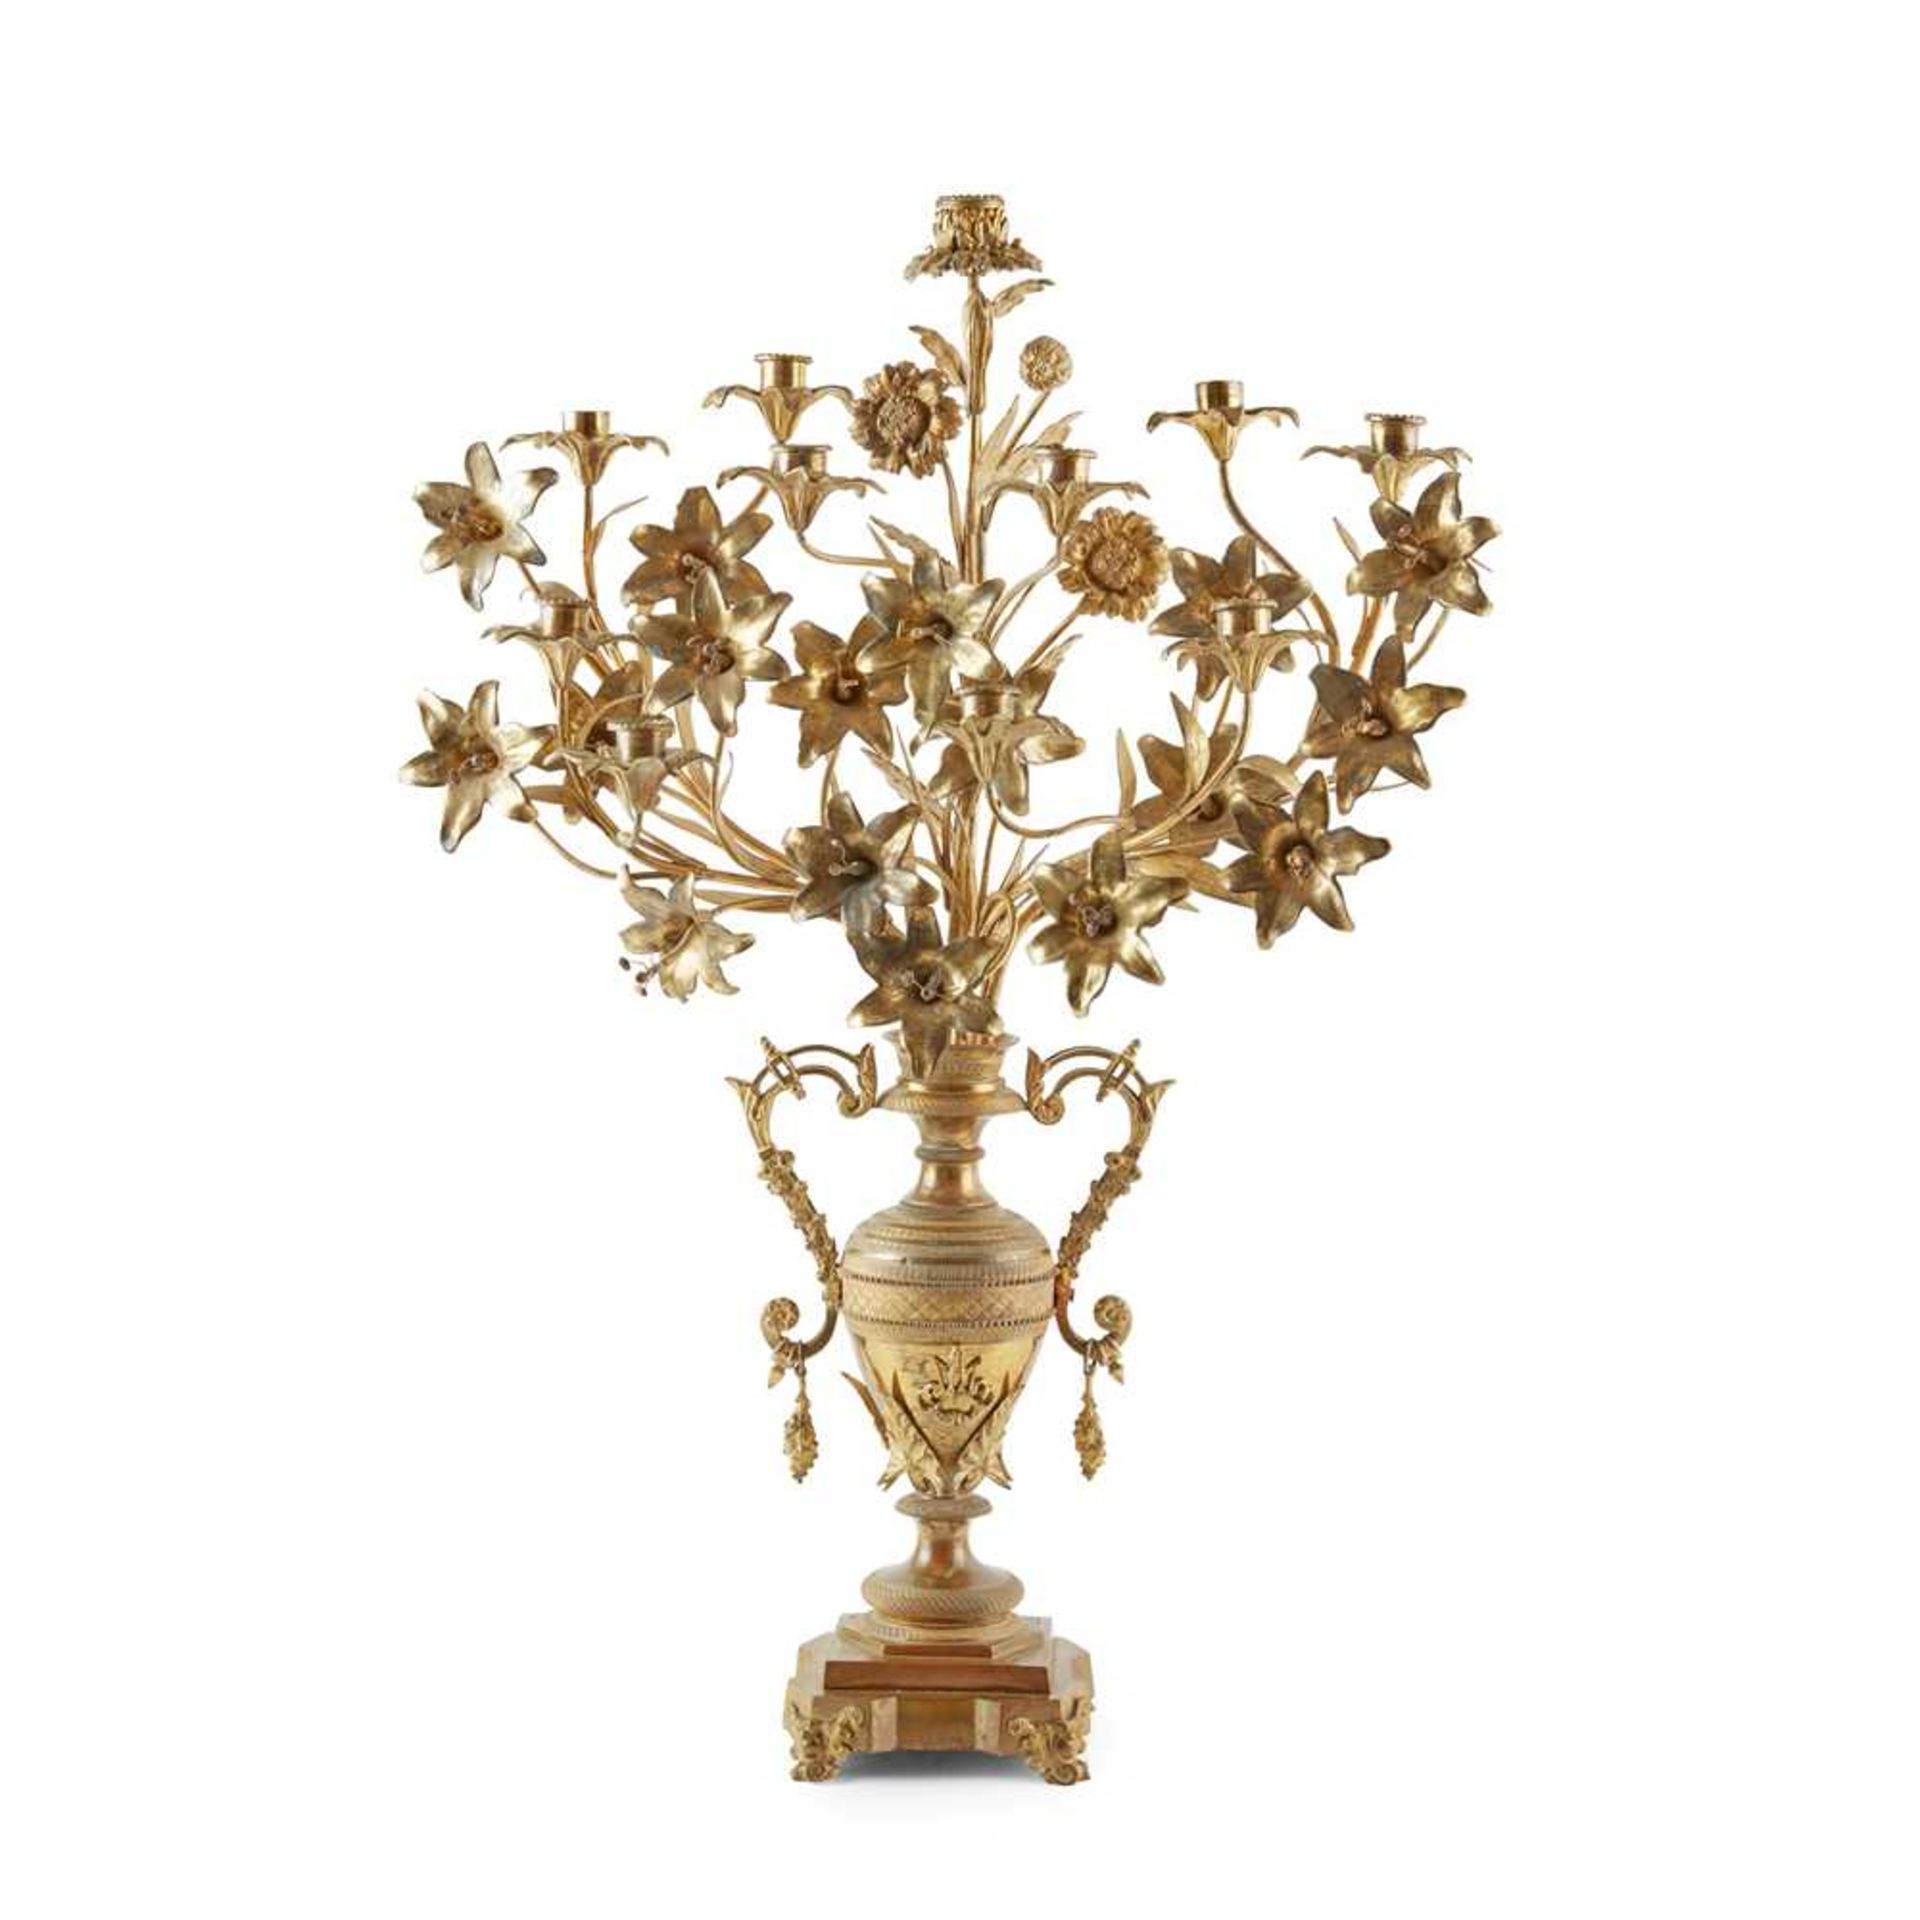 PAIR OF FRENCH LARGE GILT METAL CANDELABRA 19TH CENTURY - Image 2 of 3